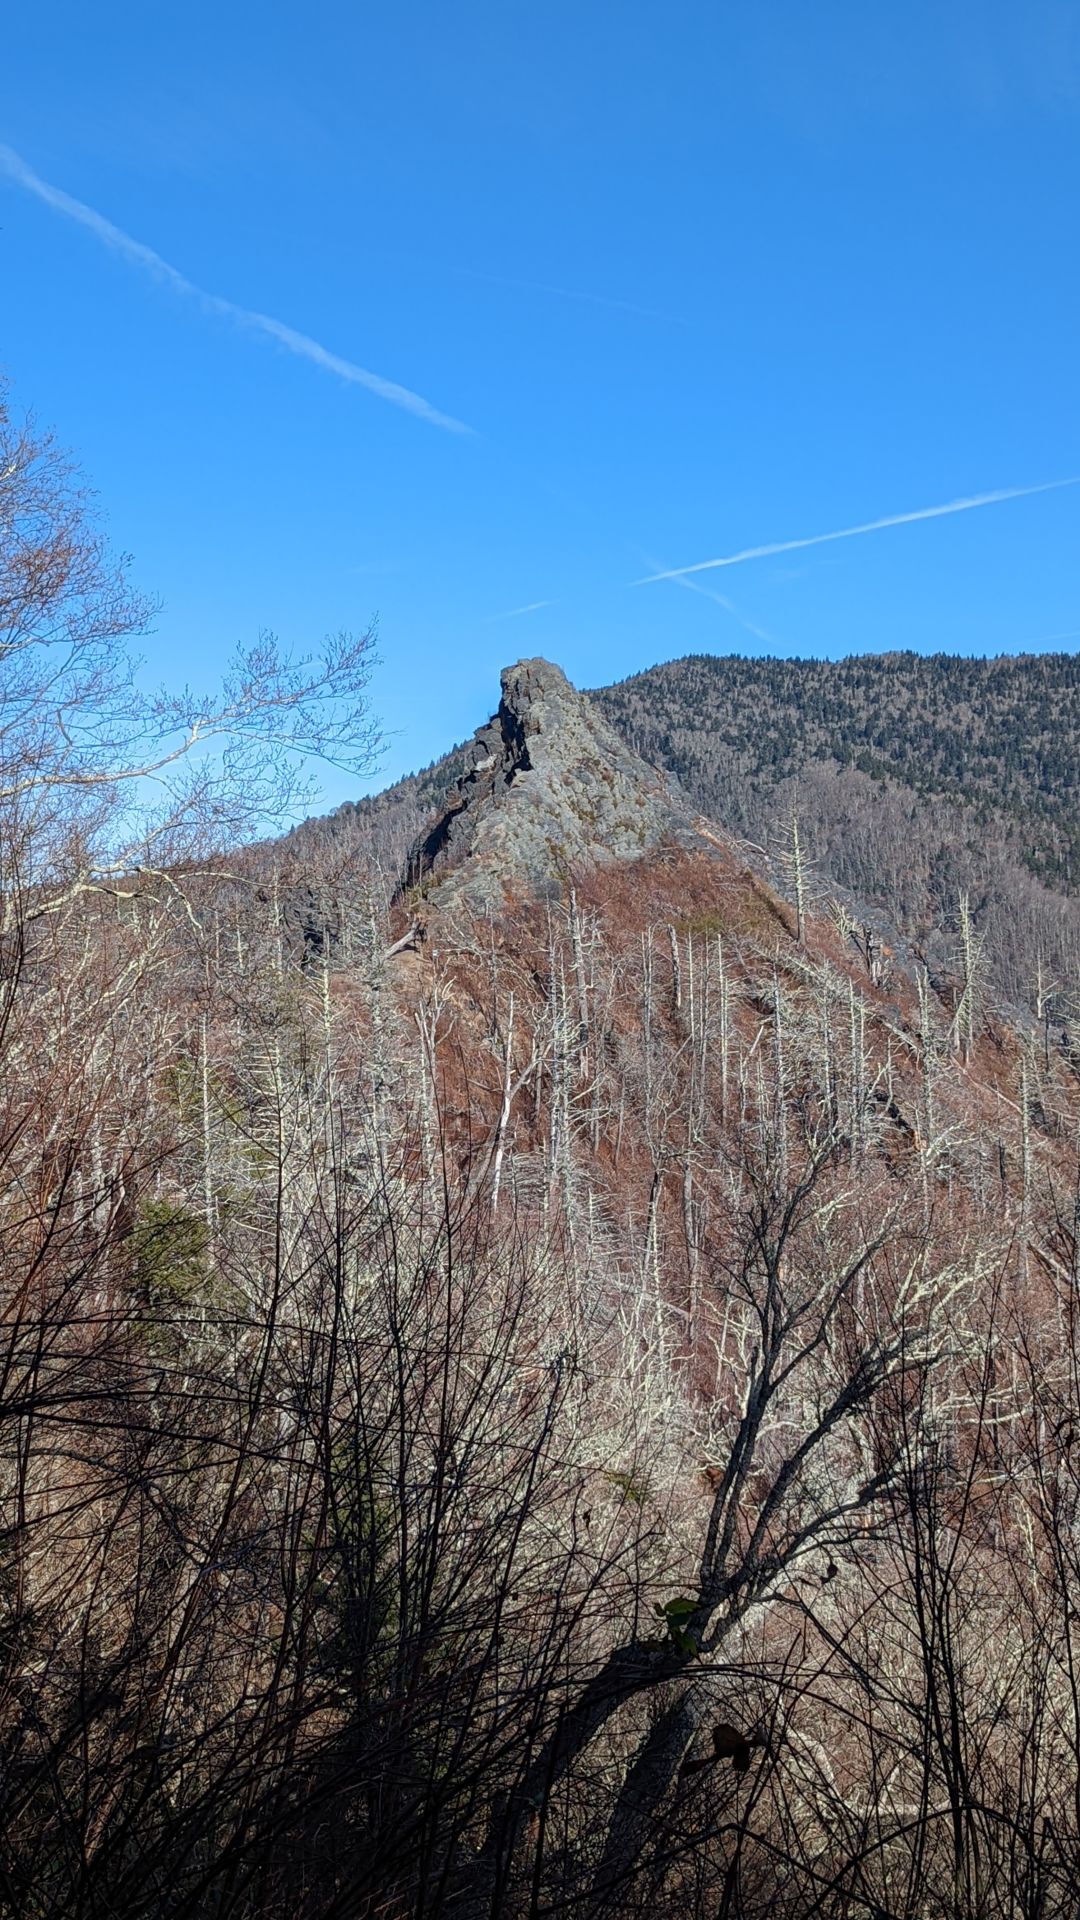 View of the Chimney Tops 5 years after the fires